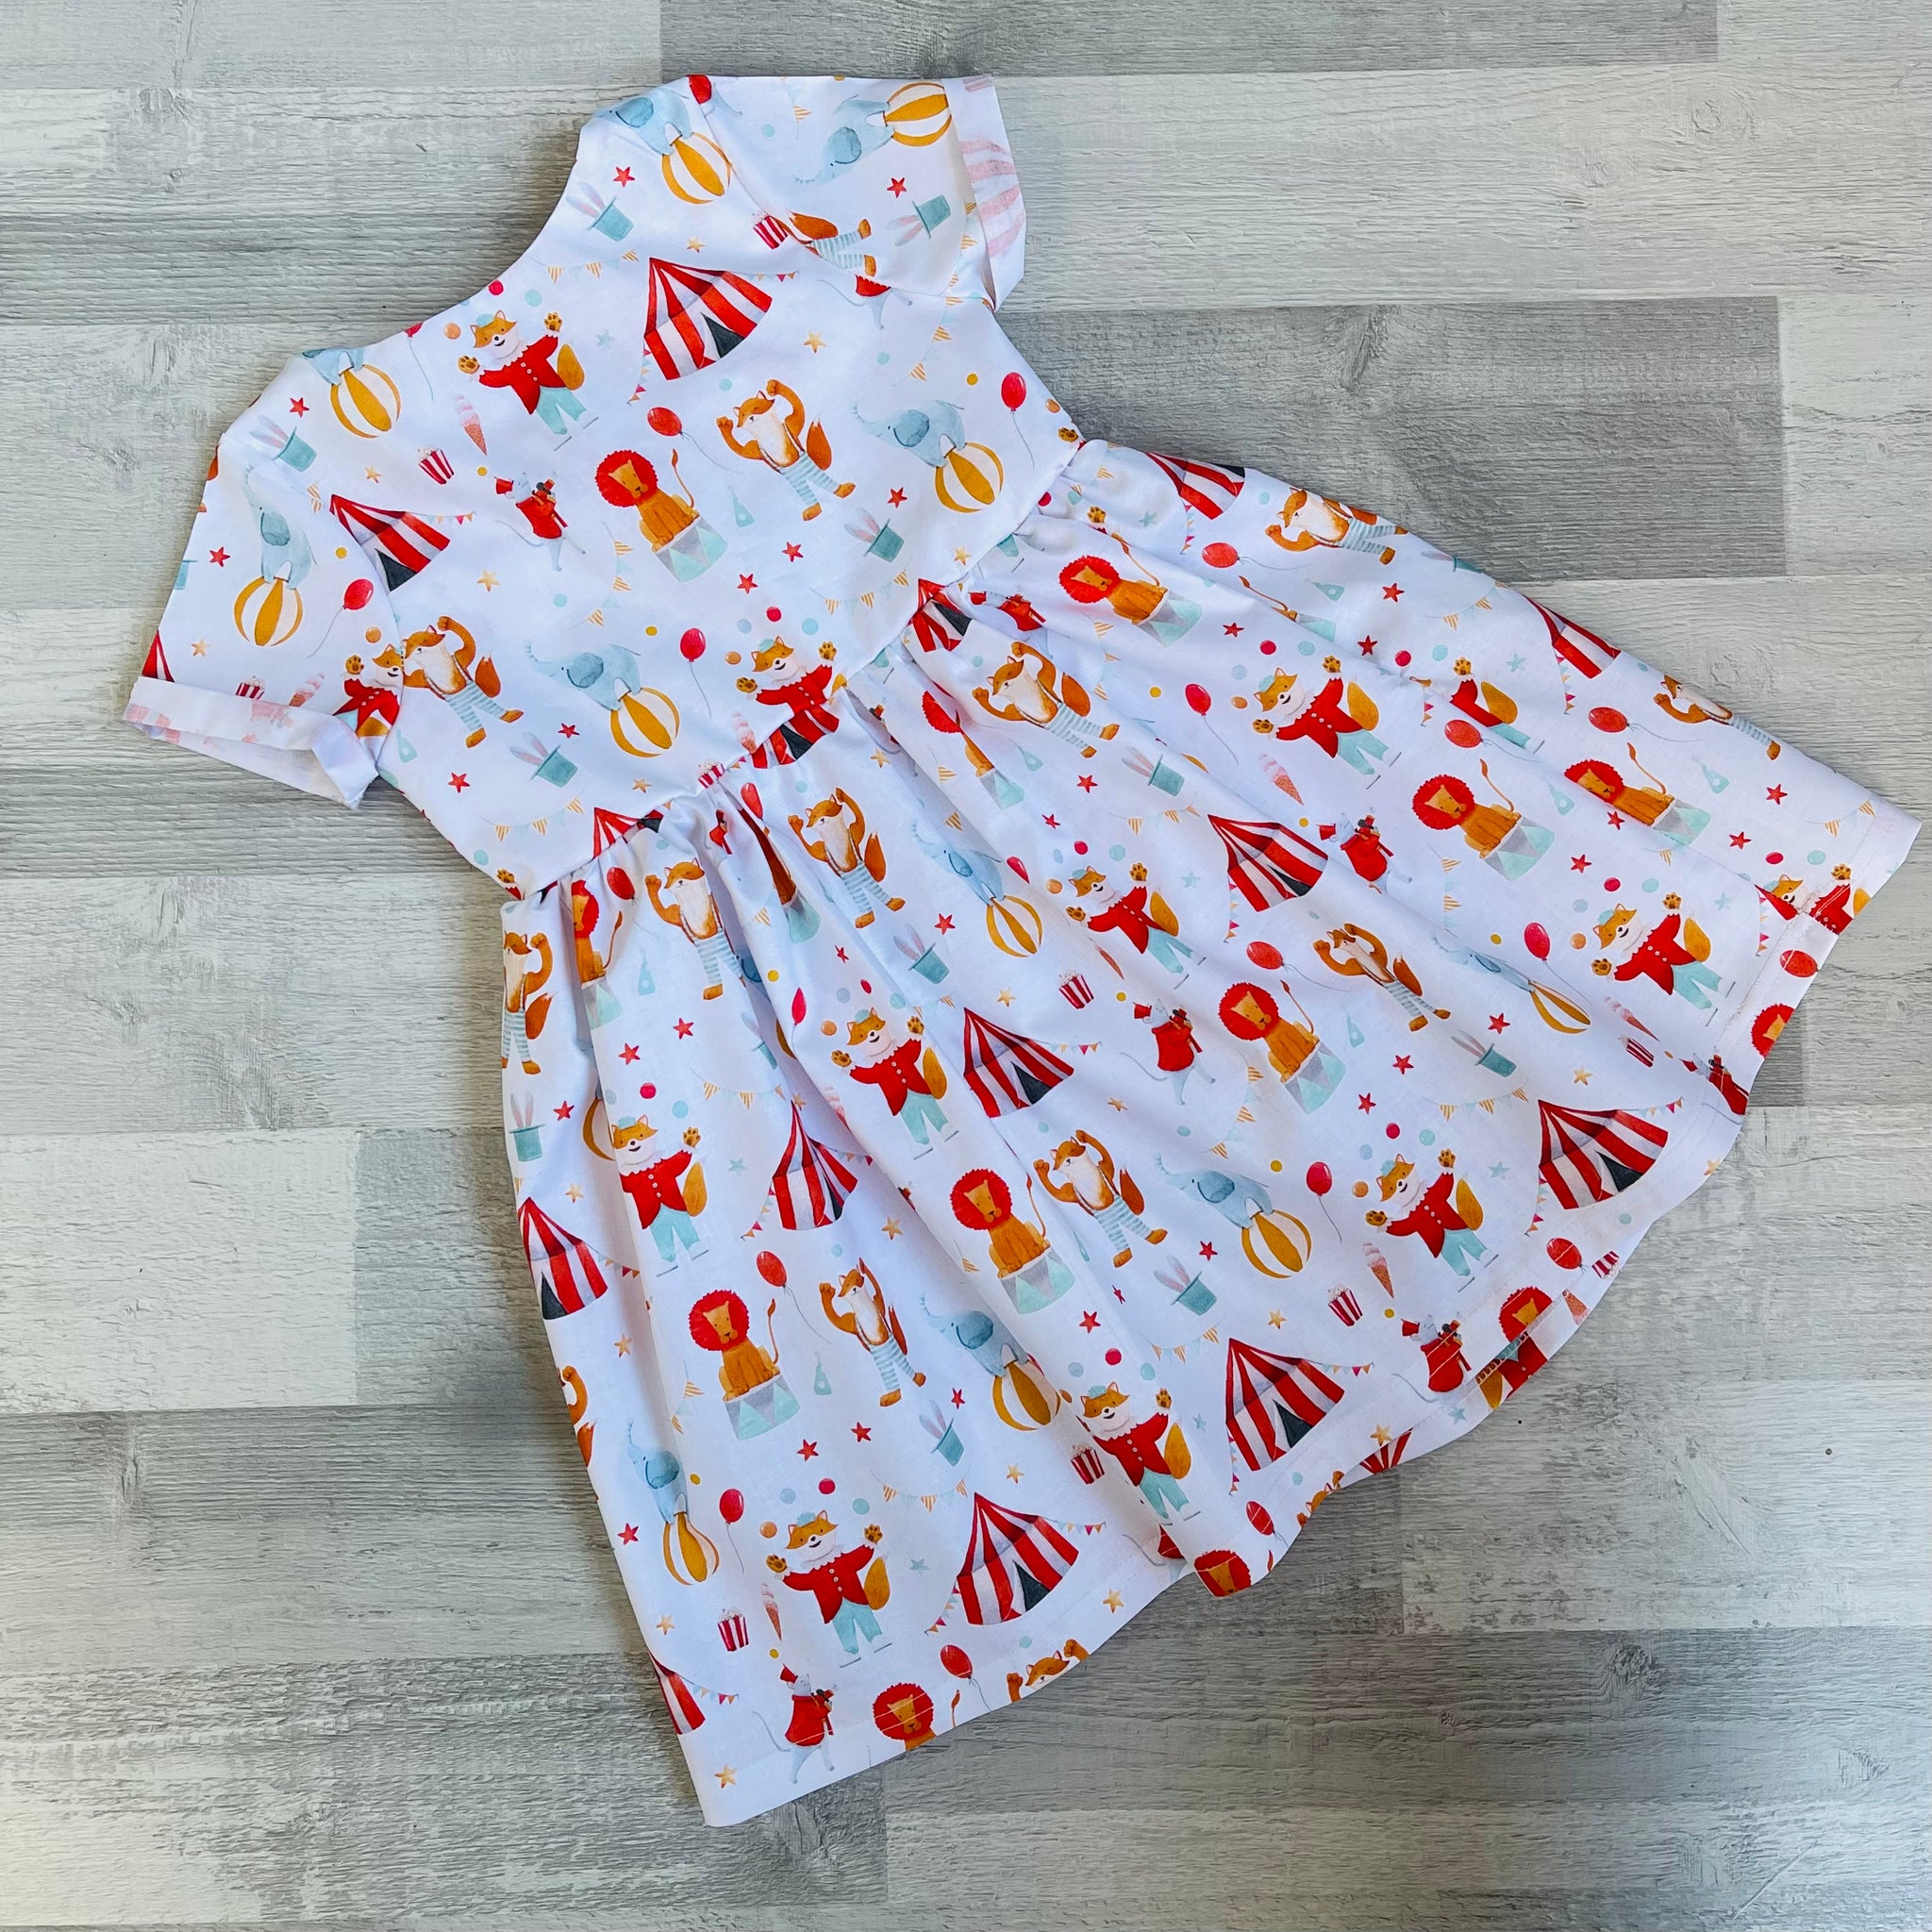 Premium 100% Cotton Sun Dress with twist back detail - Fox at the Circus